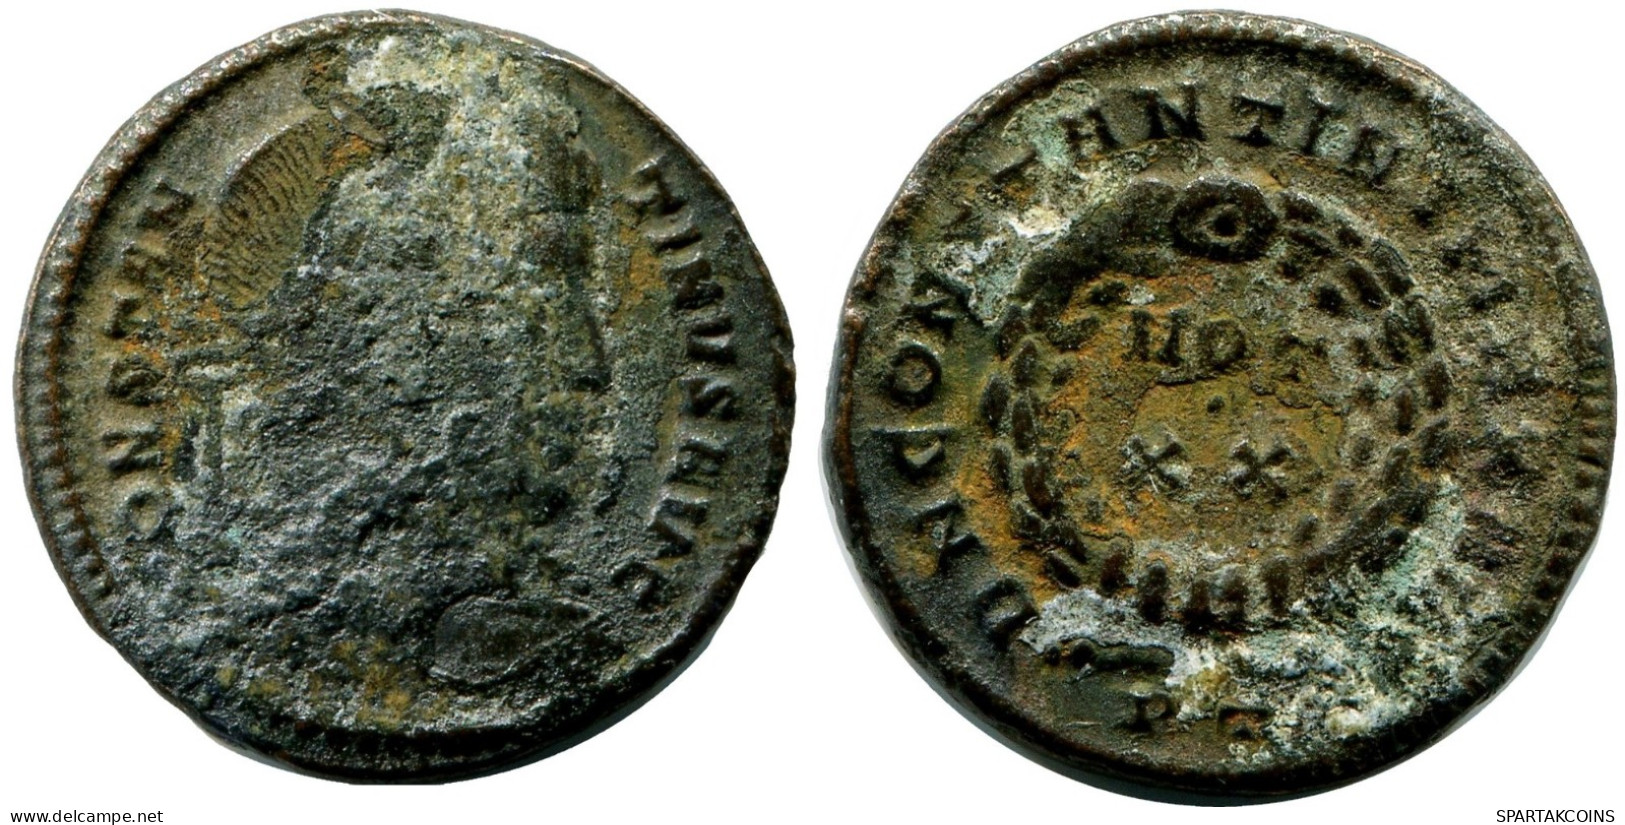 CONSTANTINE I MINTED IN TICINUM FROM THE ROYAL ONTARIO MUSEUM #ANC11083.14.D.A - The Christian Empire (307 AD Tot 363 AD)